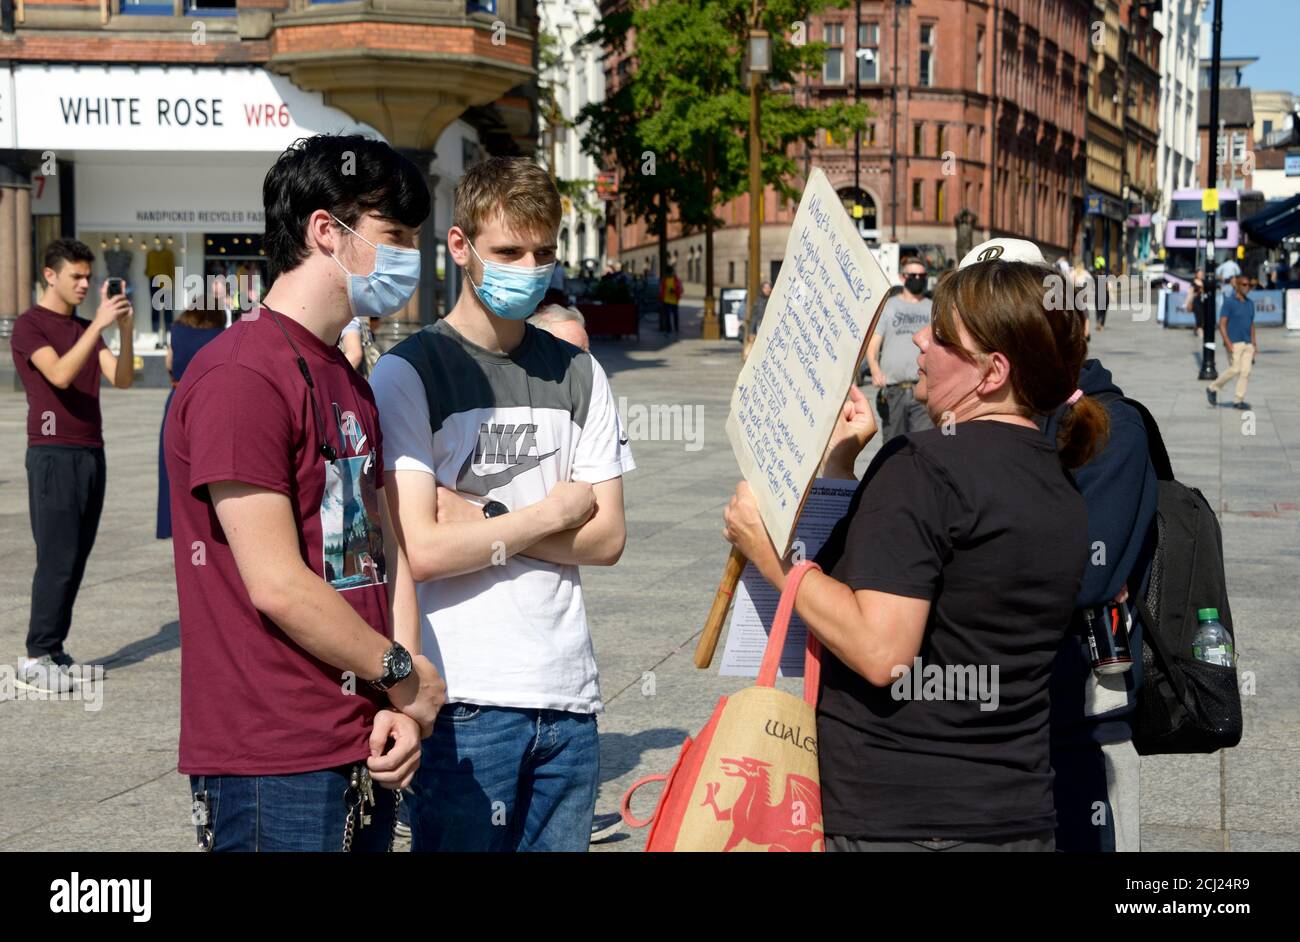 Anti-Vaccine protester, explaining to two young men. Stock Photo